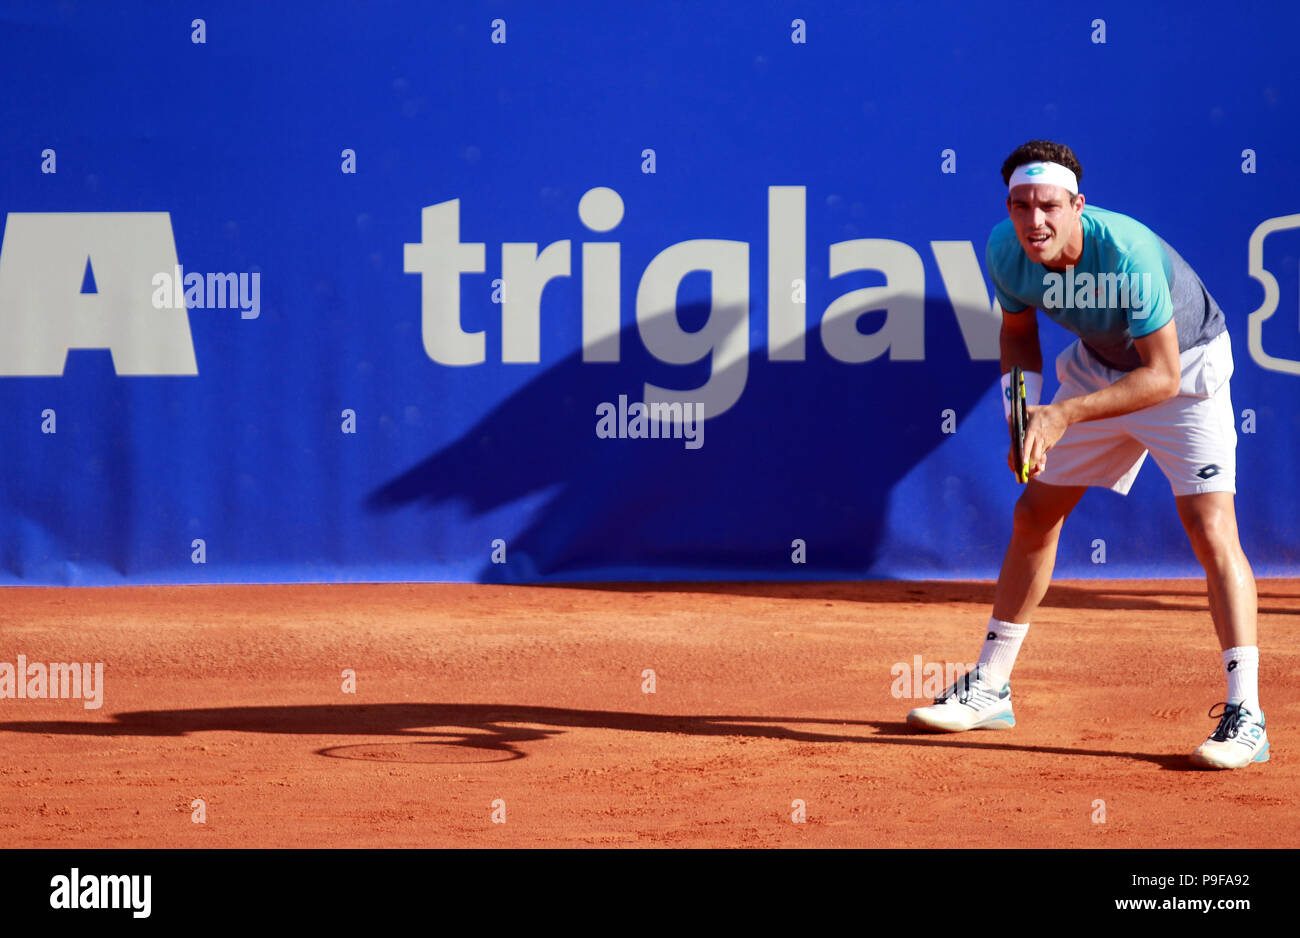 Umag, Croatia. 18th July 2018. CROATIA, Umag: Marco Cecchinato of Italy prepares to receive against Jiri Vesely during the singles match Vesely v Cecchinato at the ATP 29th Plava laguna Croatia Open Umag tournament at the at the Goran Ivanisevic ATP Stadium, on July 18, 2018 in Umag. Credit: Andrea Spinelli/Alamy Live News Stock Photo